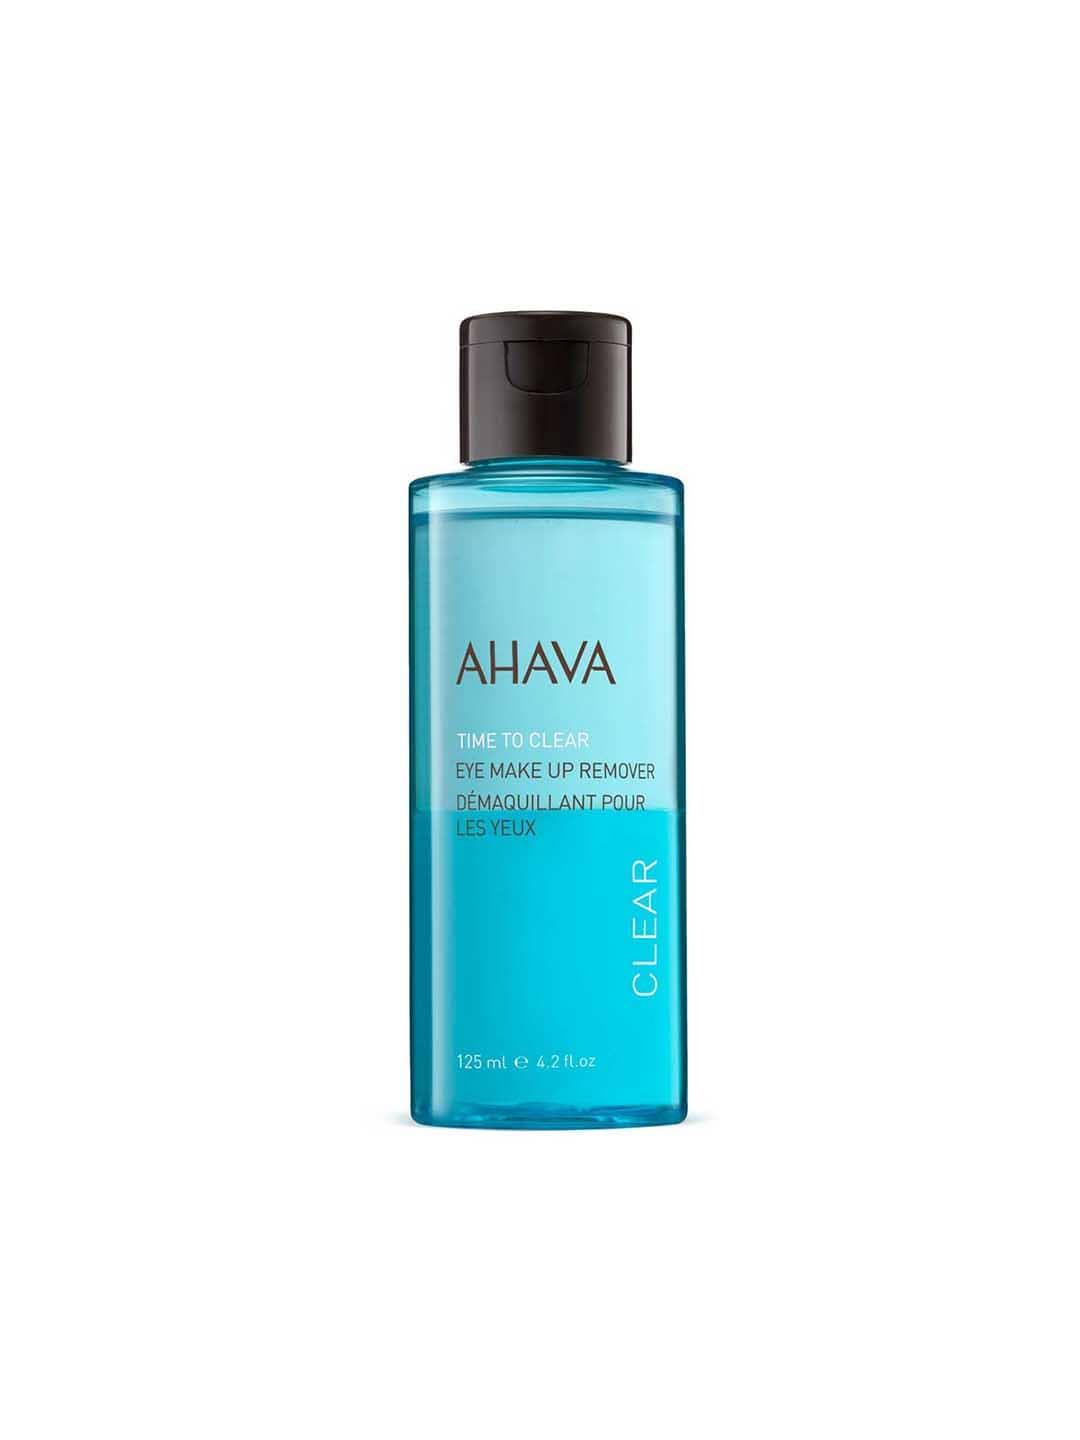 ahava time to clear eye makeup remover to remove waterproof eye makeup - 125ml